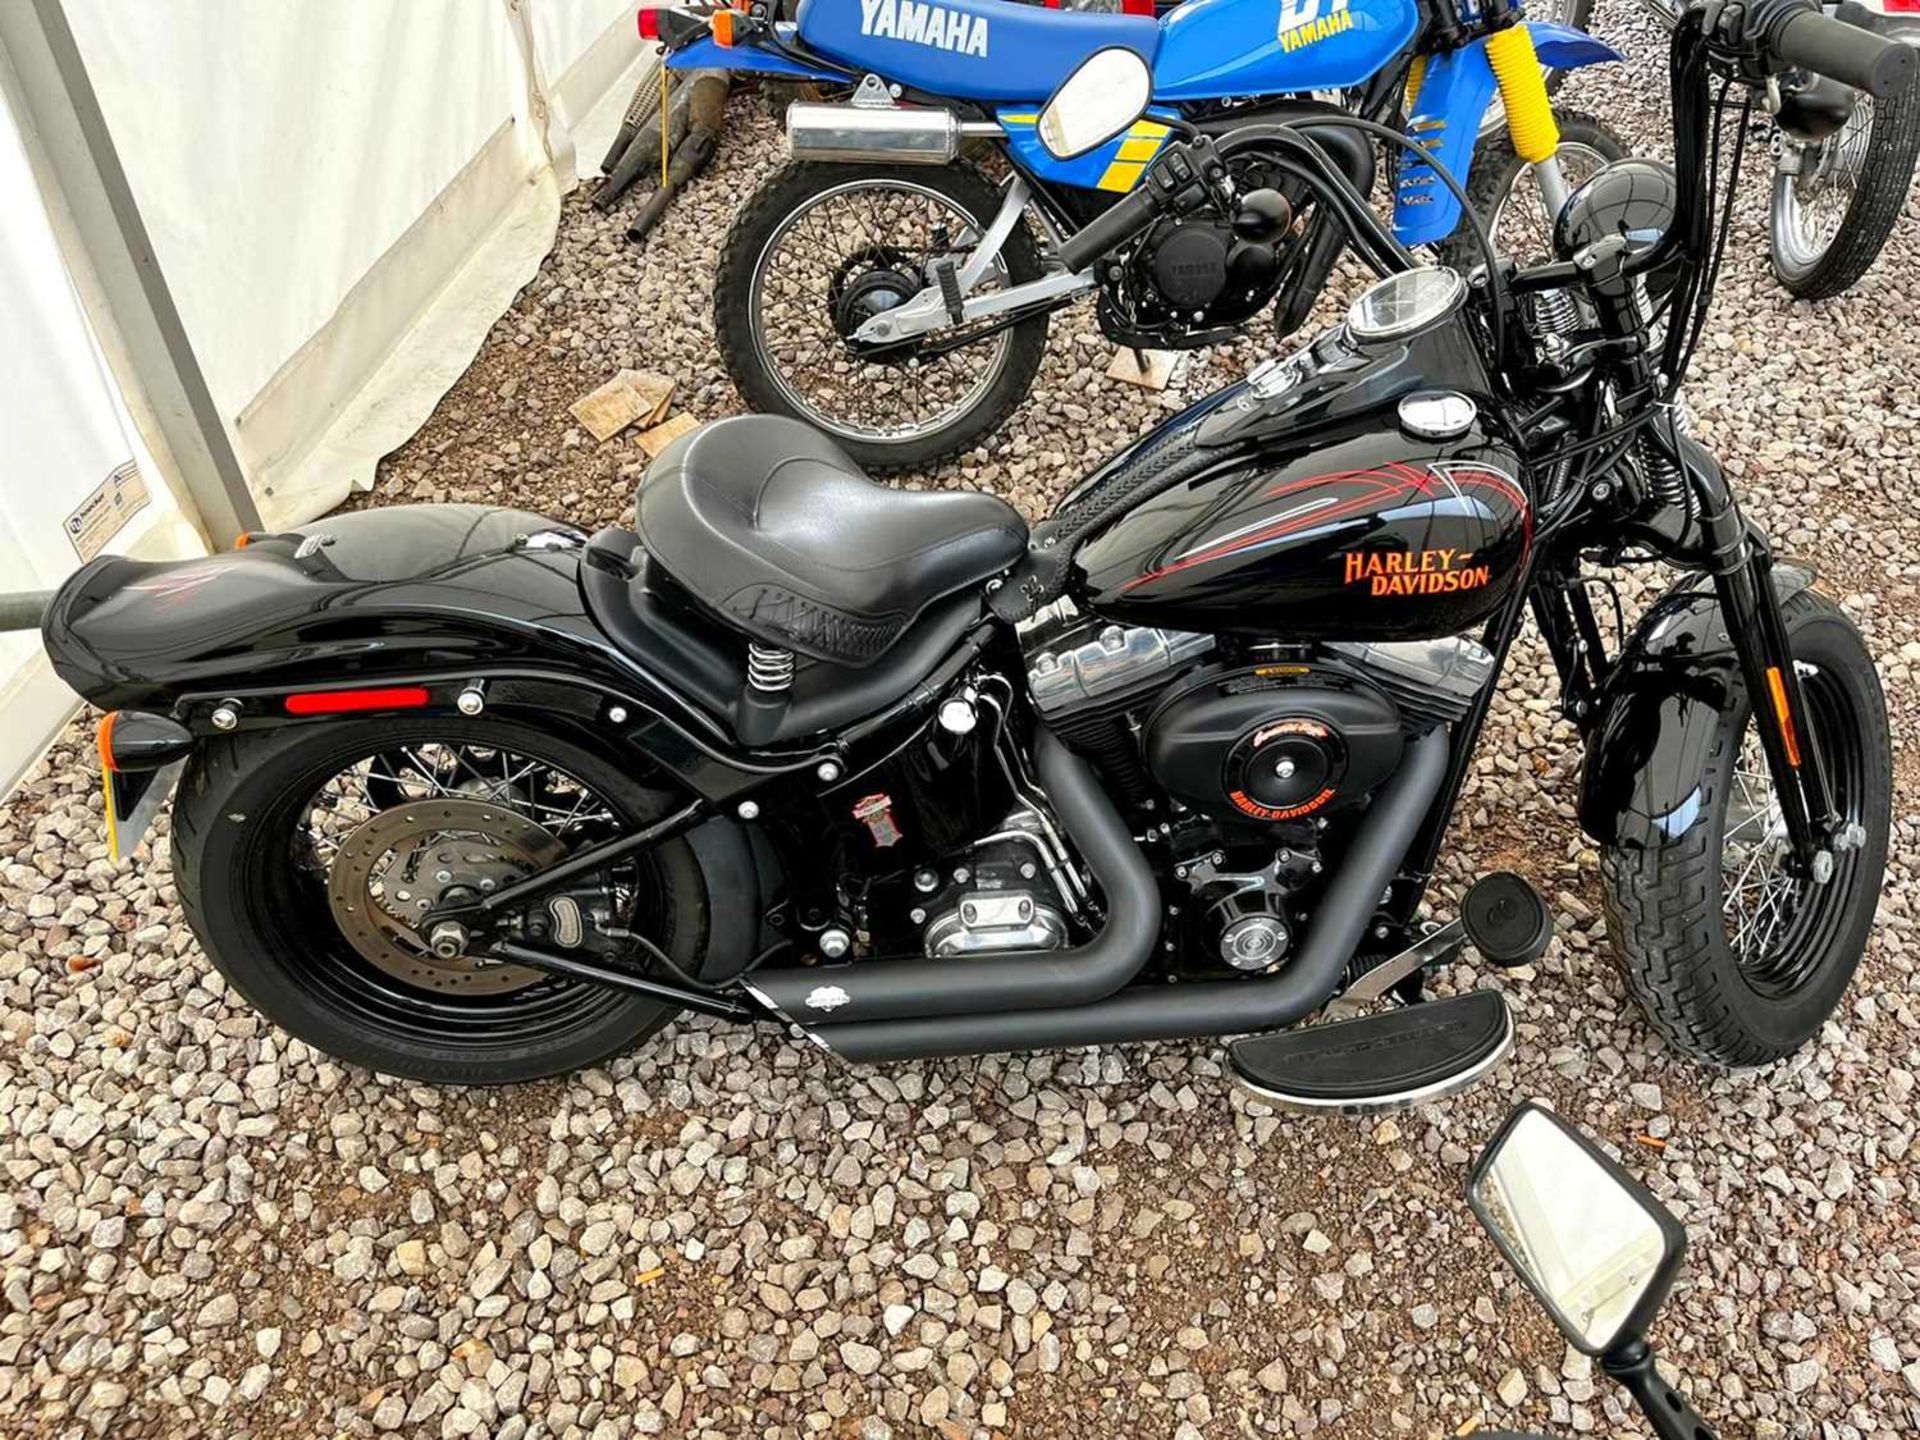 2008 Harley-Davidson Cross Bones Only 5000 miles, with Stage 2 Screaming Eagle upgrade - Image 11 of 32